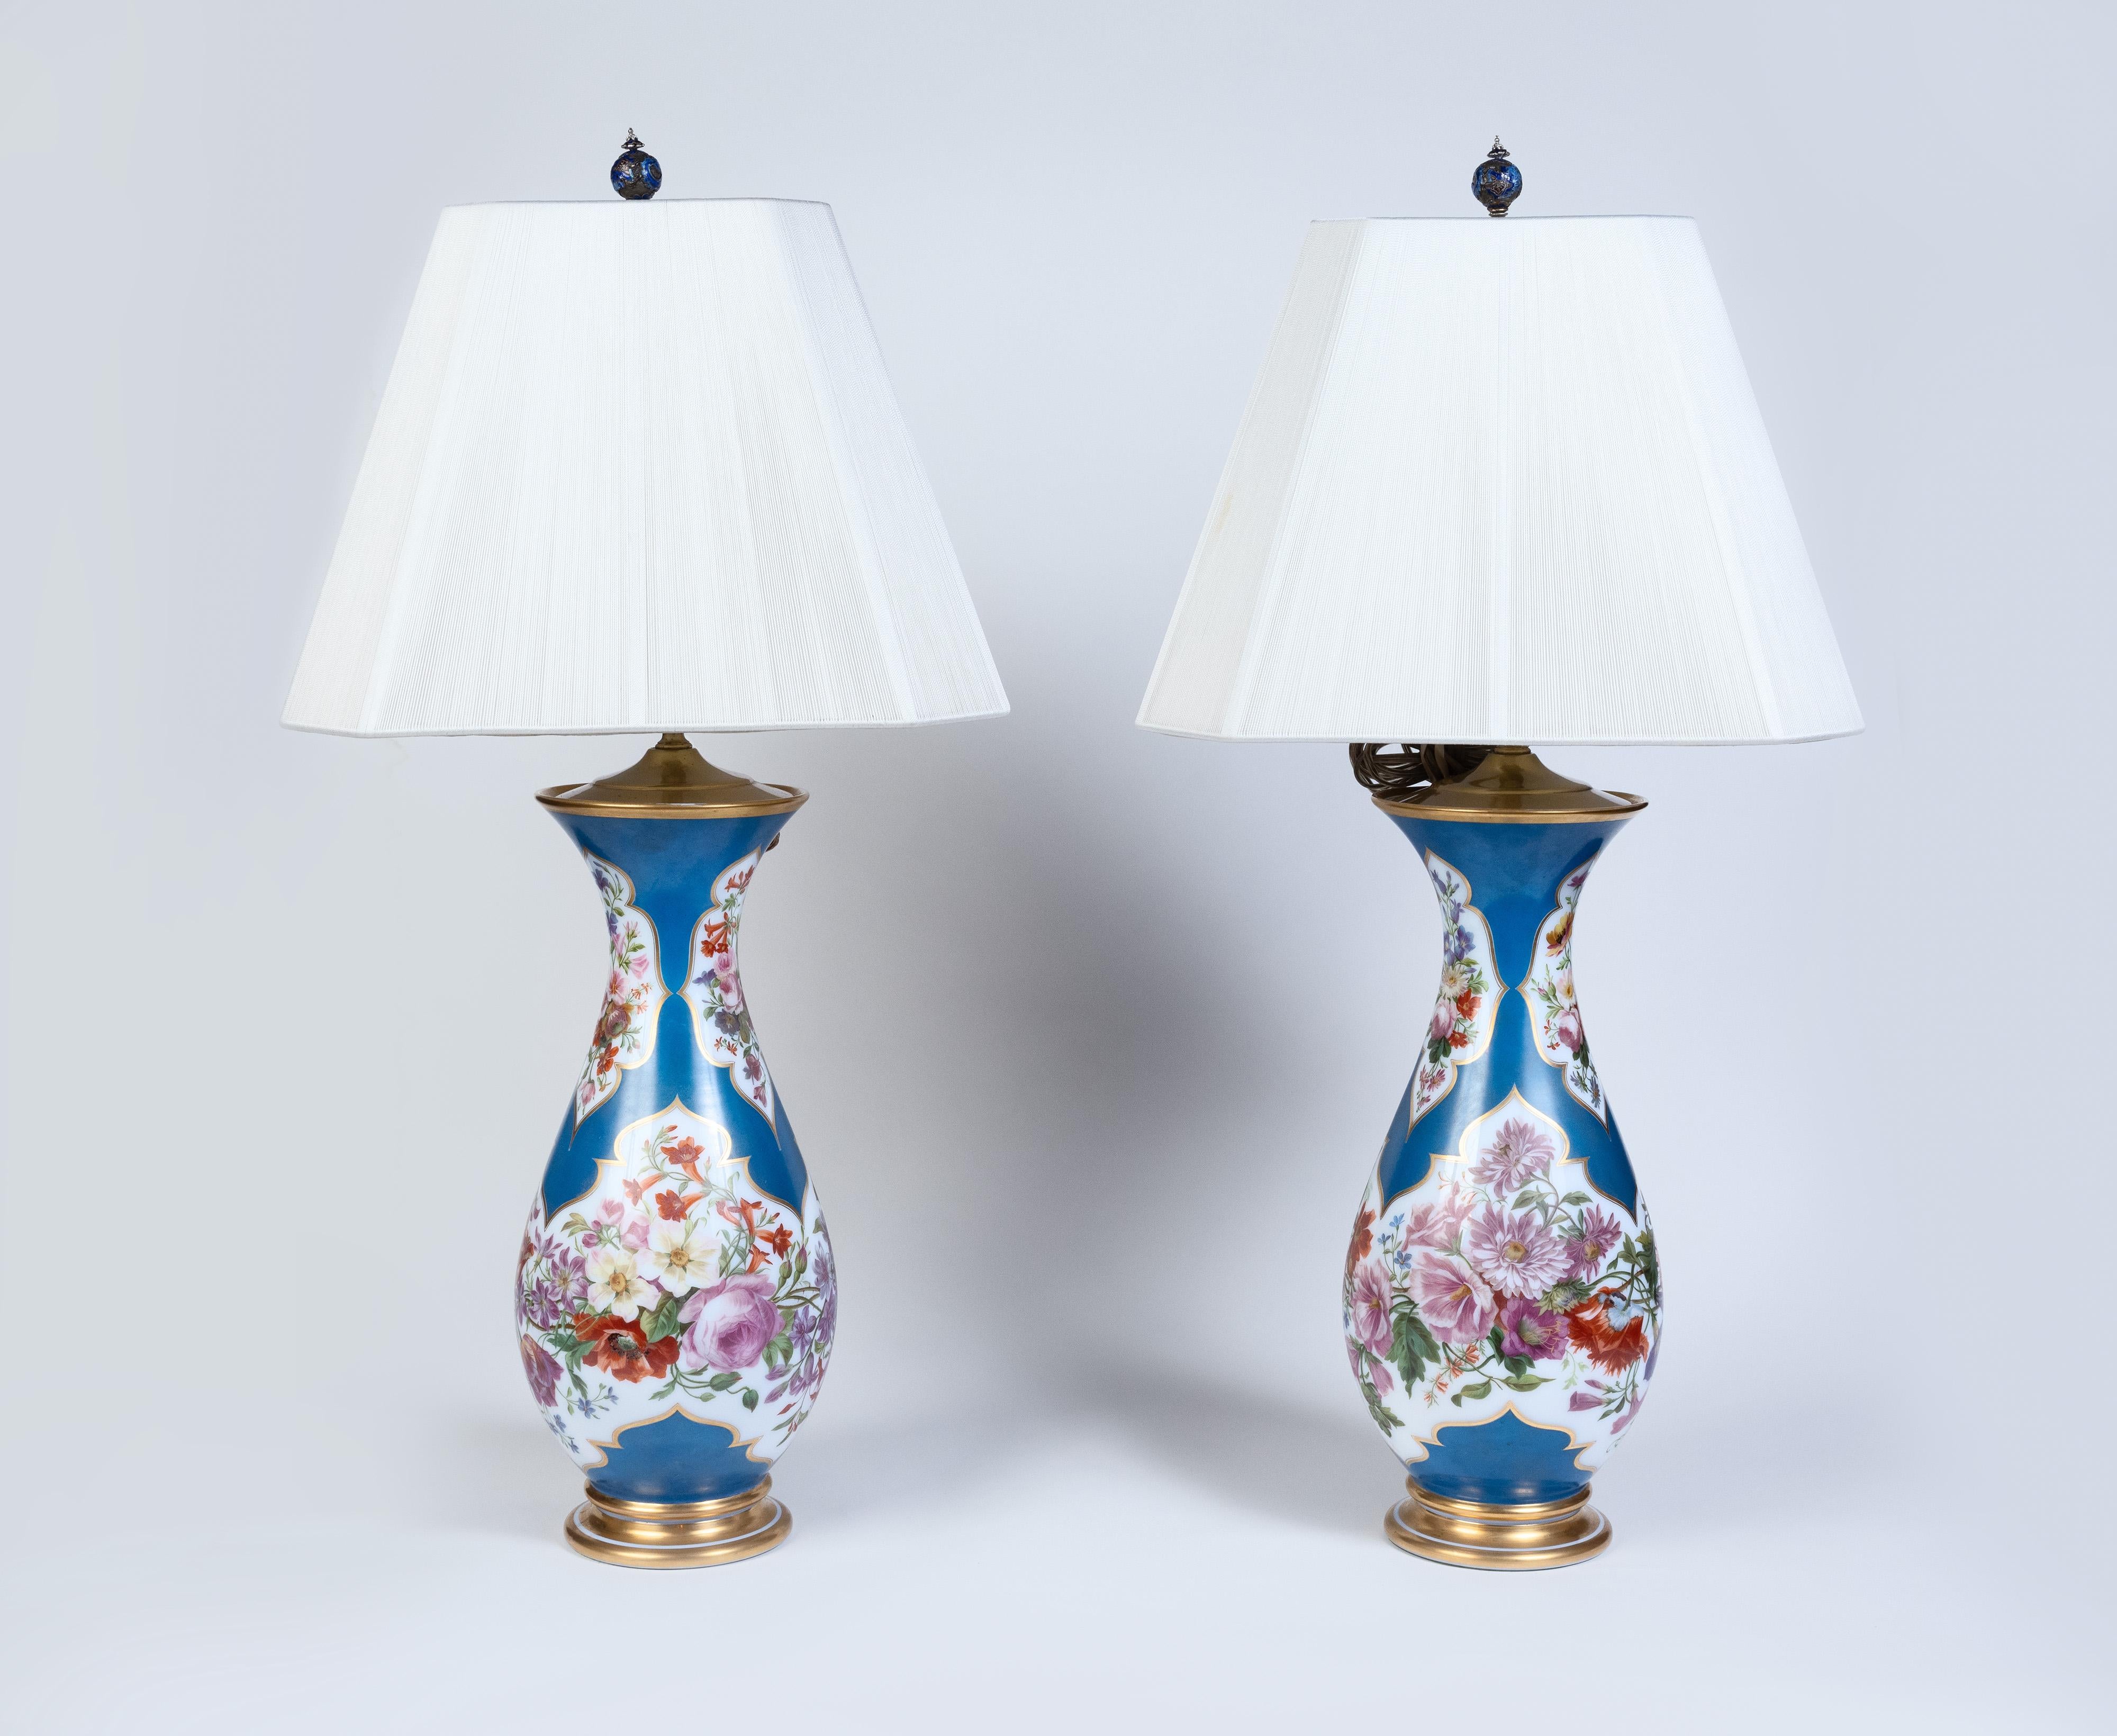 A Large Pair of French Baccarat Opaline Glass Vases / Lamps, 19th Century, Circa 1870

These opulent lamp / vases are adorned with meticulous hand-painted floral motifs, showcasing the delicate craftsmanship characteristic of Baccarat. The opaline